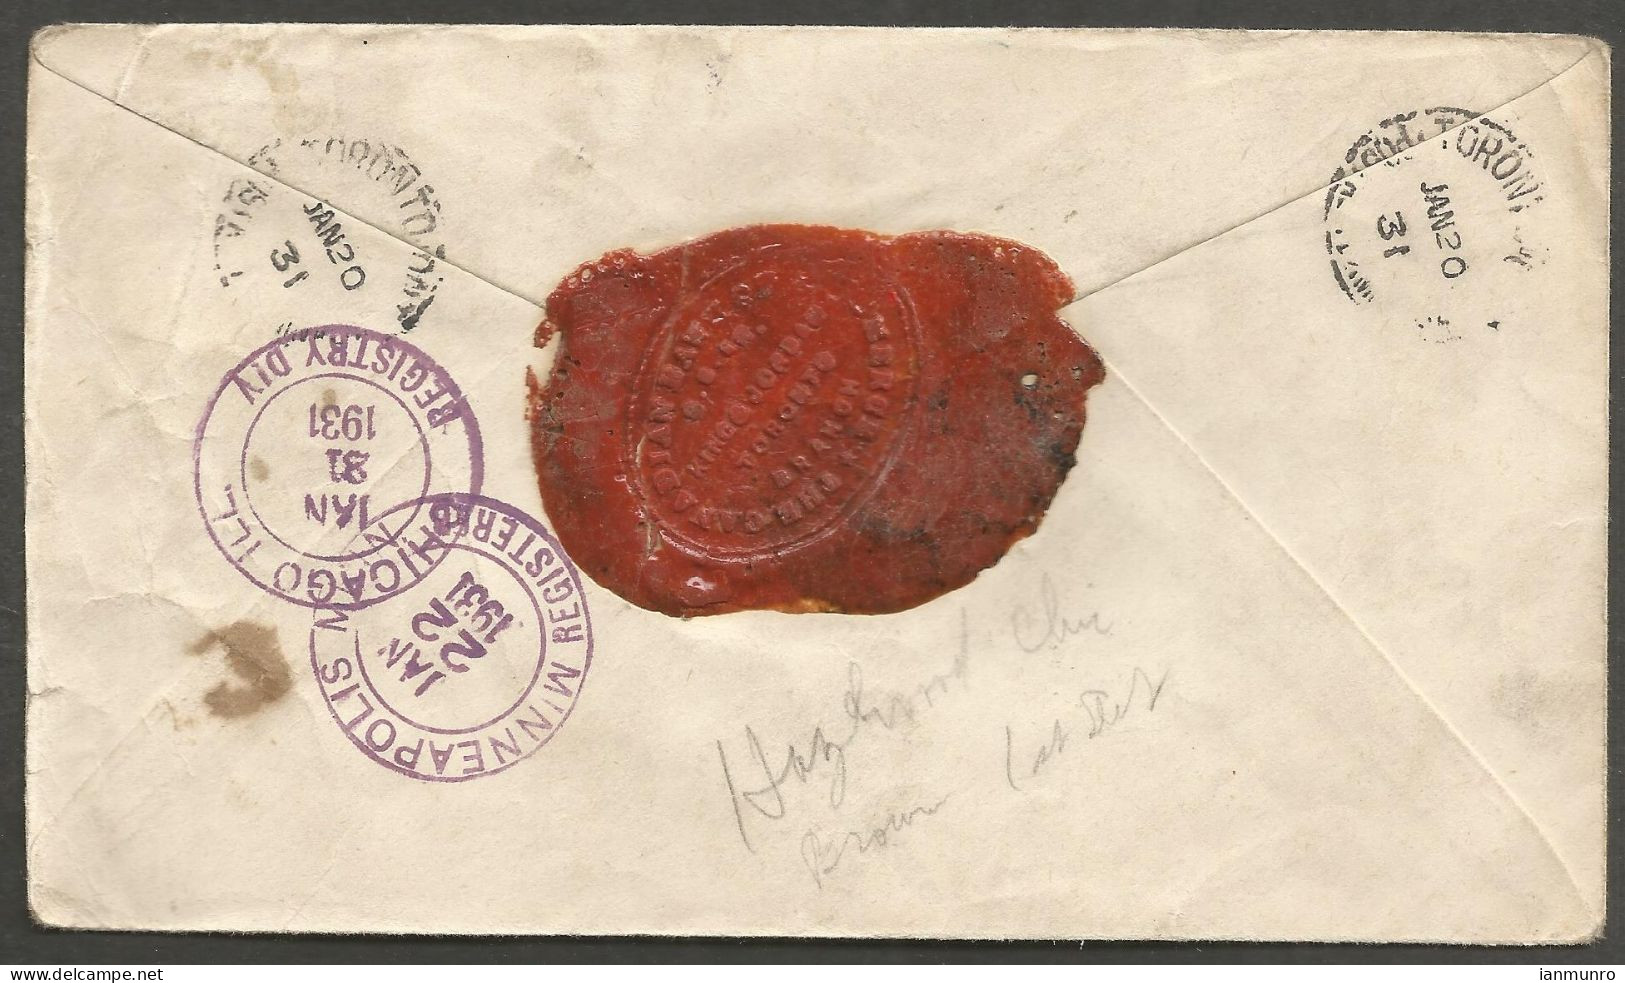 1931 Wax Seal On Bank Of Commerce Registered Cover 15c Arch/Library CDS Toronto Ontario - Histoire Postale